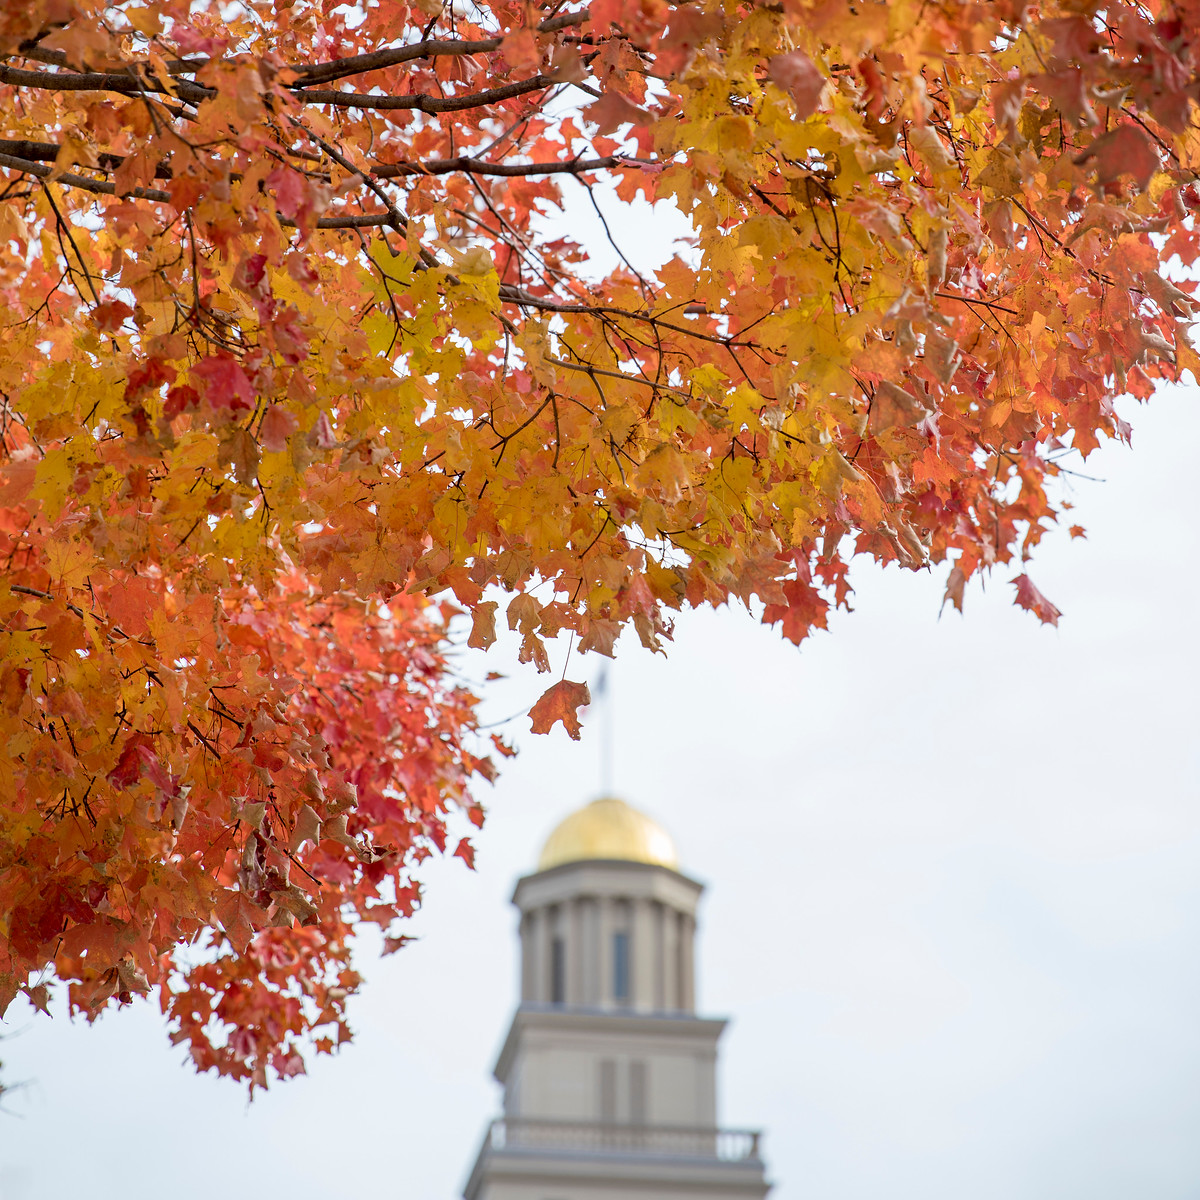 A photograph of the Old Capitol dome surrounded by trees full of orange-colored leaves